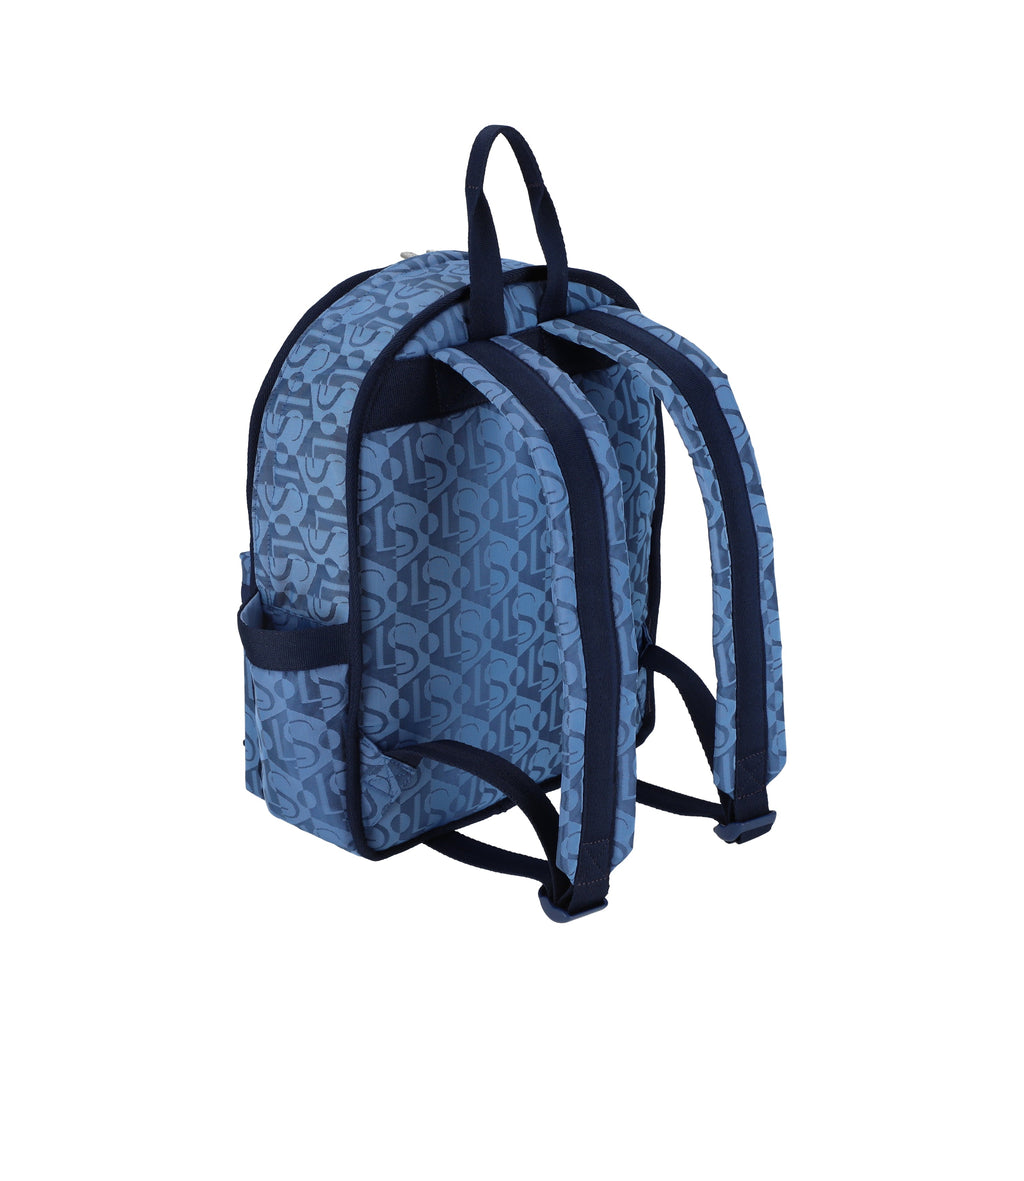 Route Small Backpack - 23818842734640